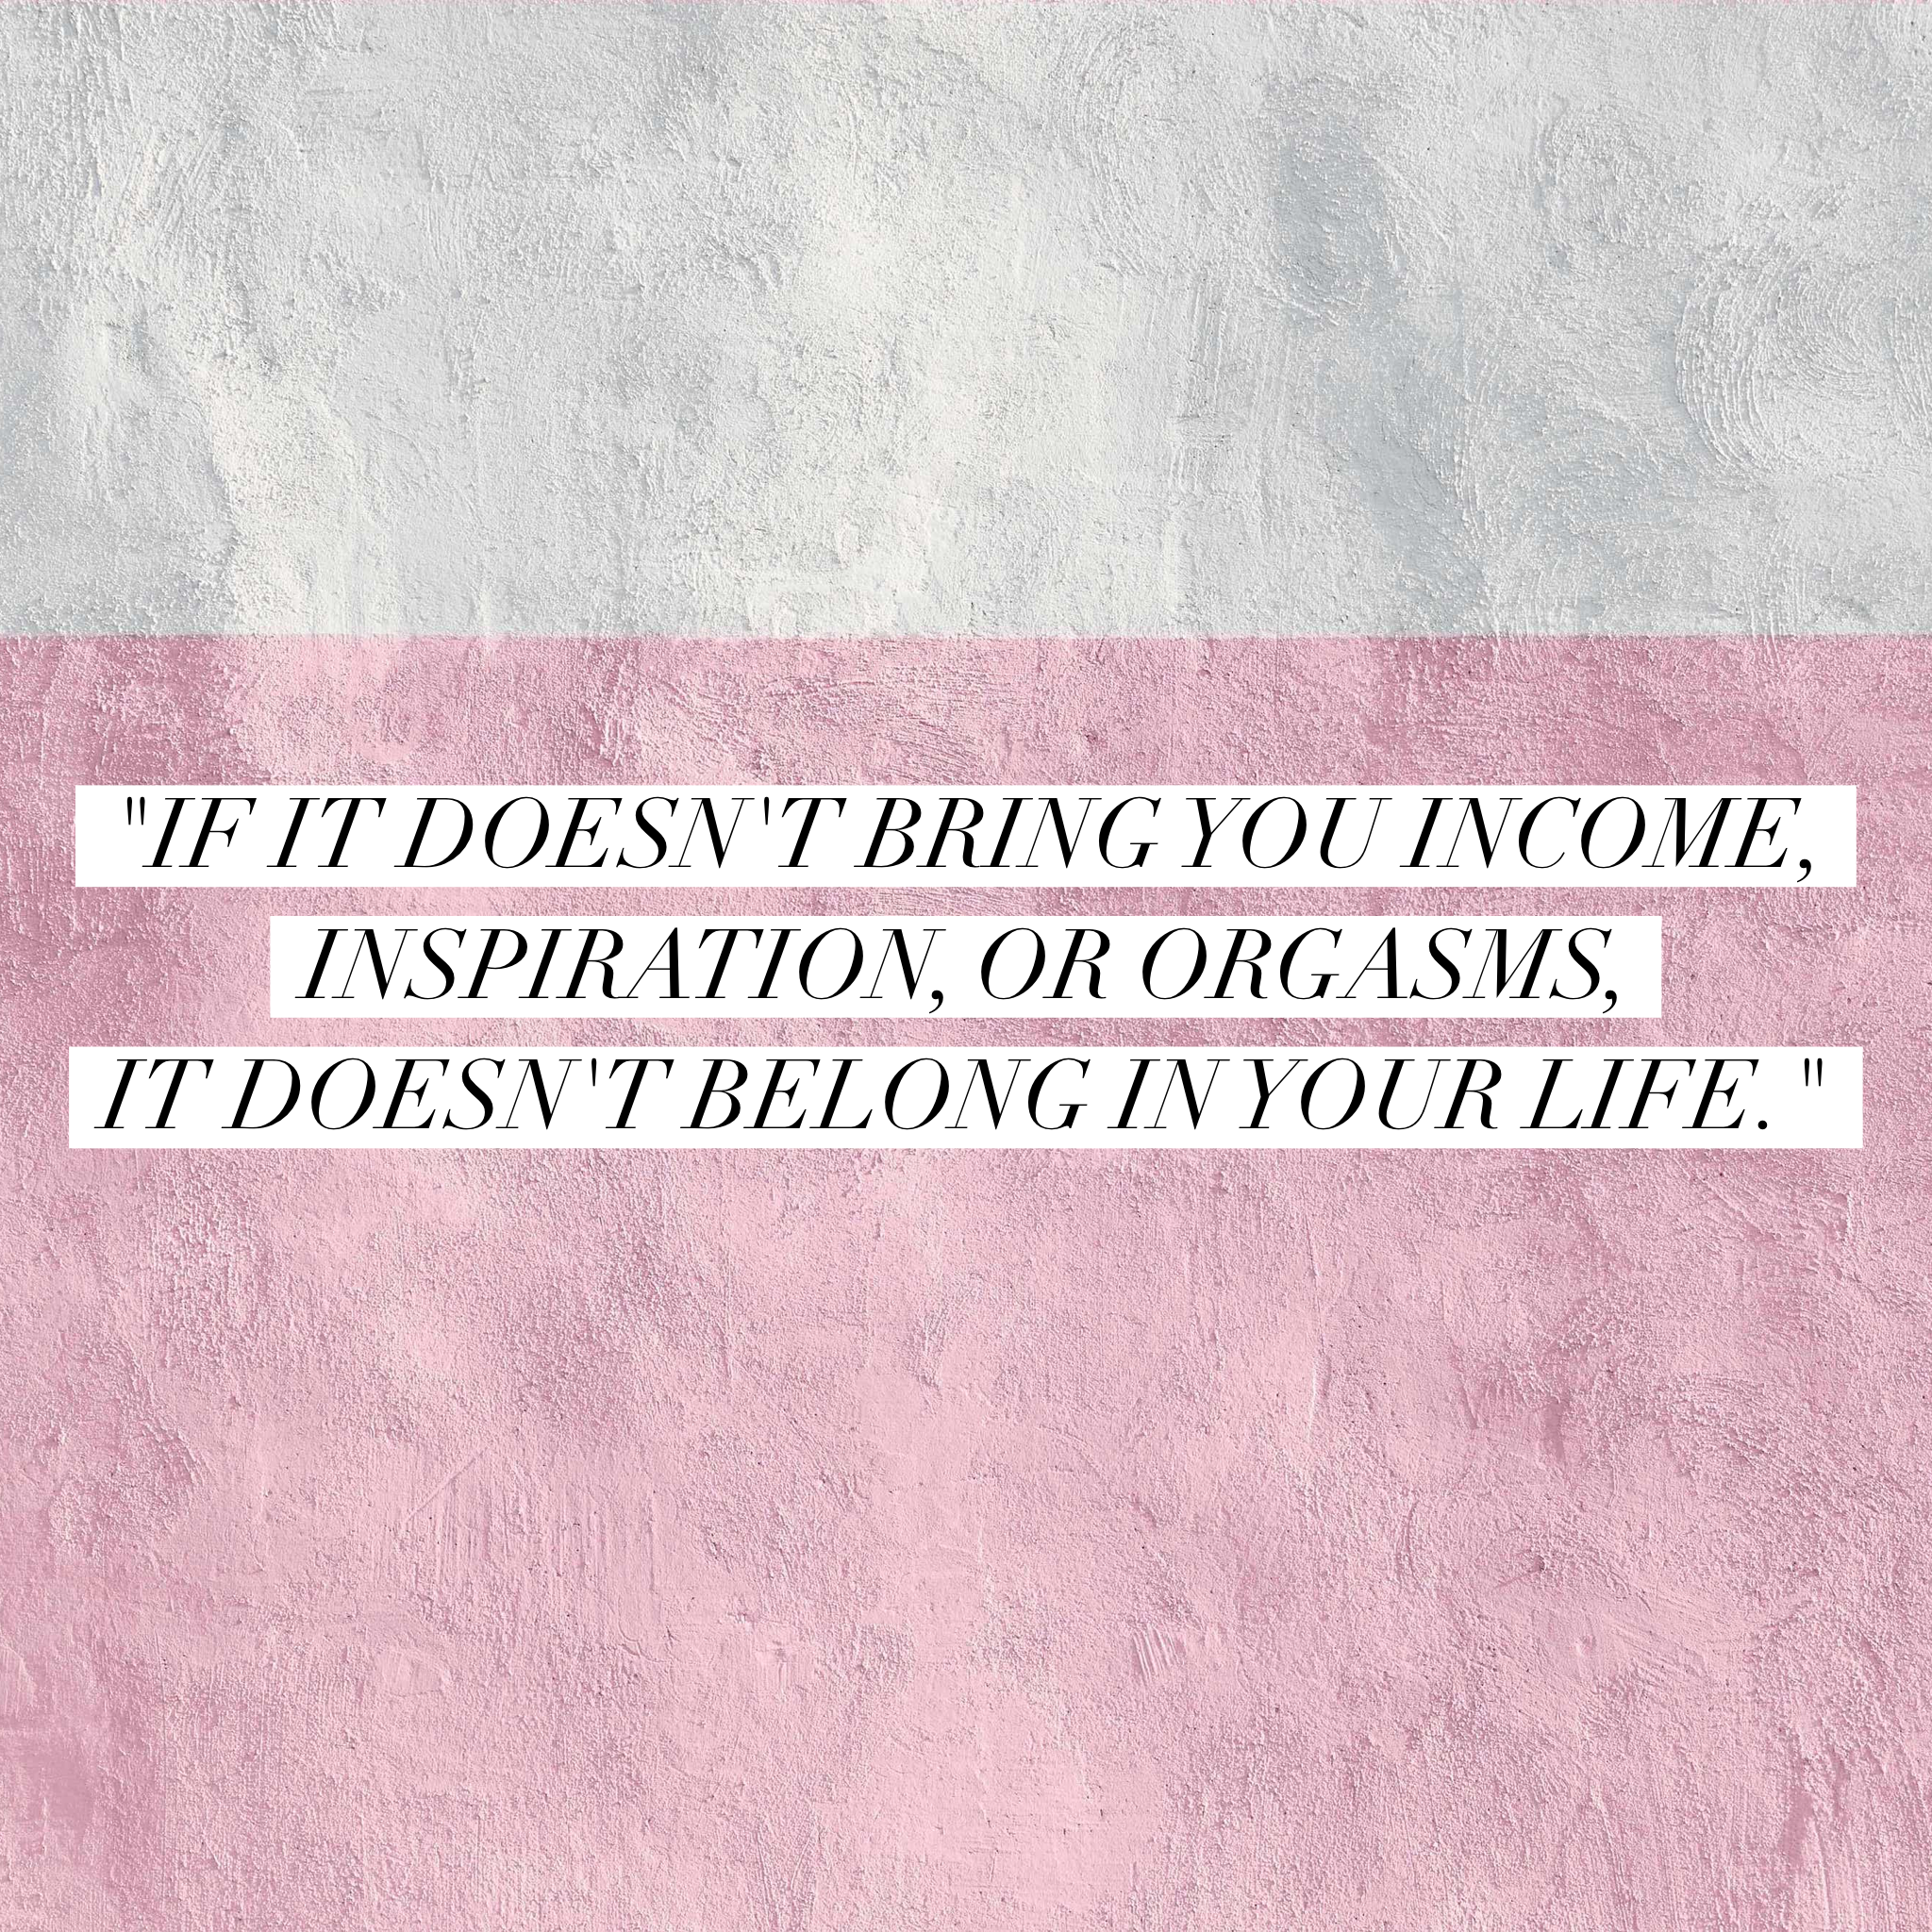 &#8220;If it doesn&#8217;t bring you income, inspiration, or orgasms, it doesn&#8217;t belong in your life.&#8221;